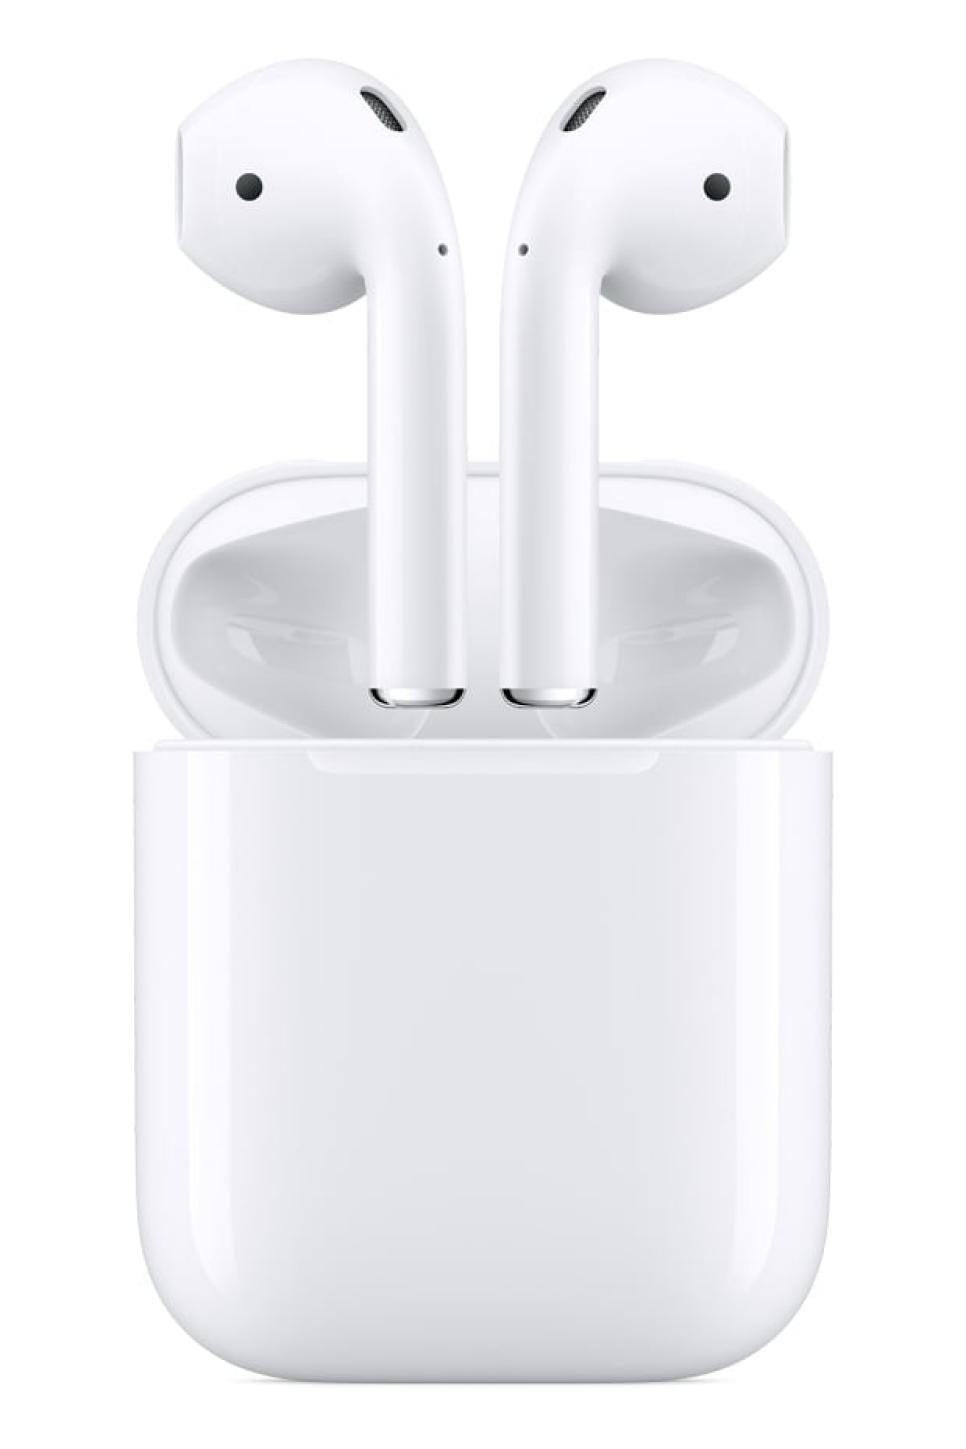 rx-walmartapple-airpods-with-charging-case-2nd-generation.jpeg